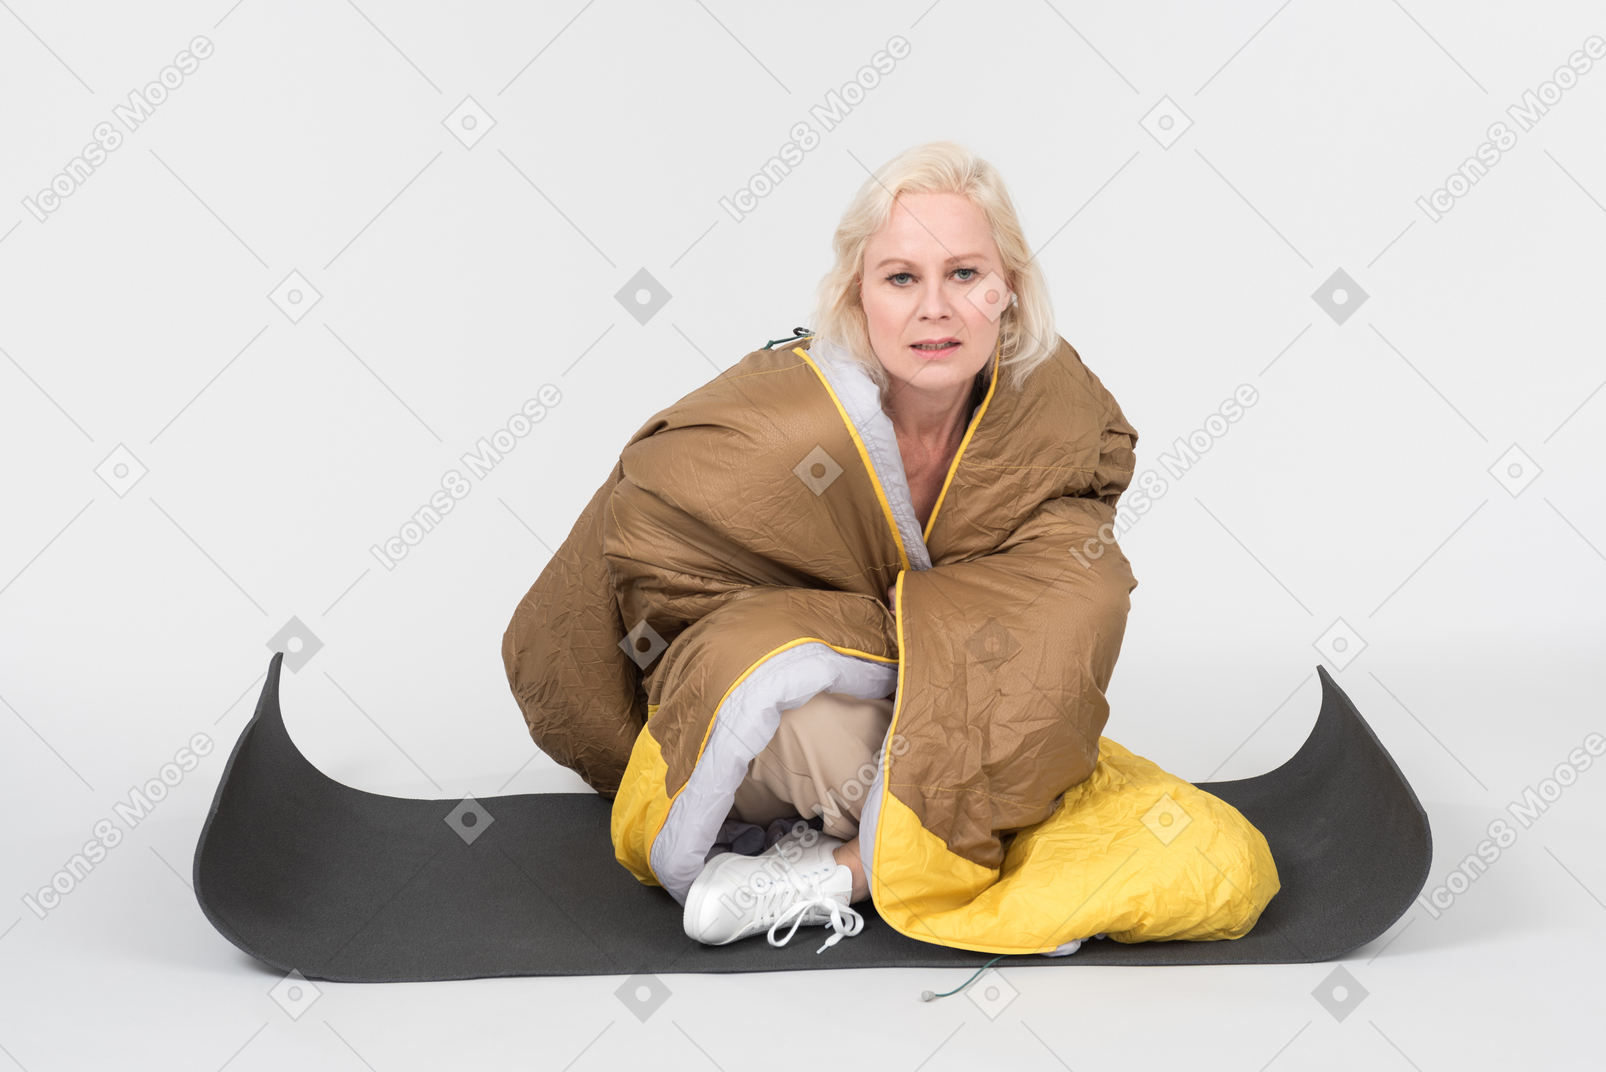 Mature woman sitting on tourist mat wrapped in blanket